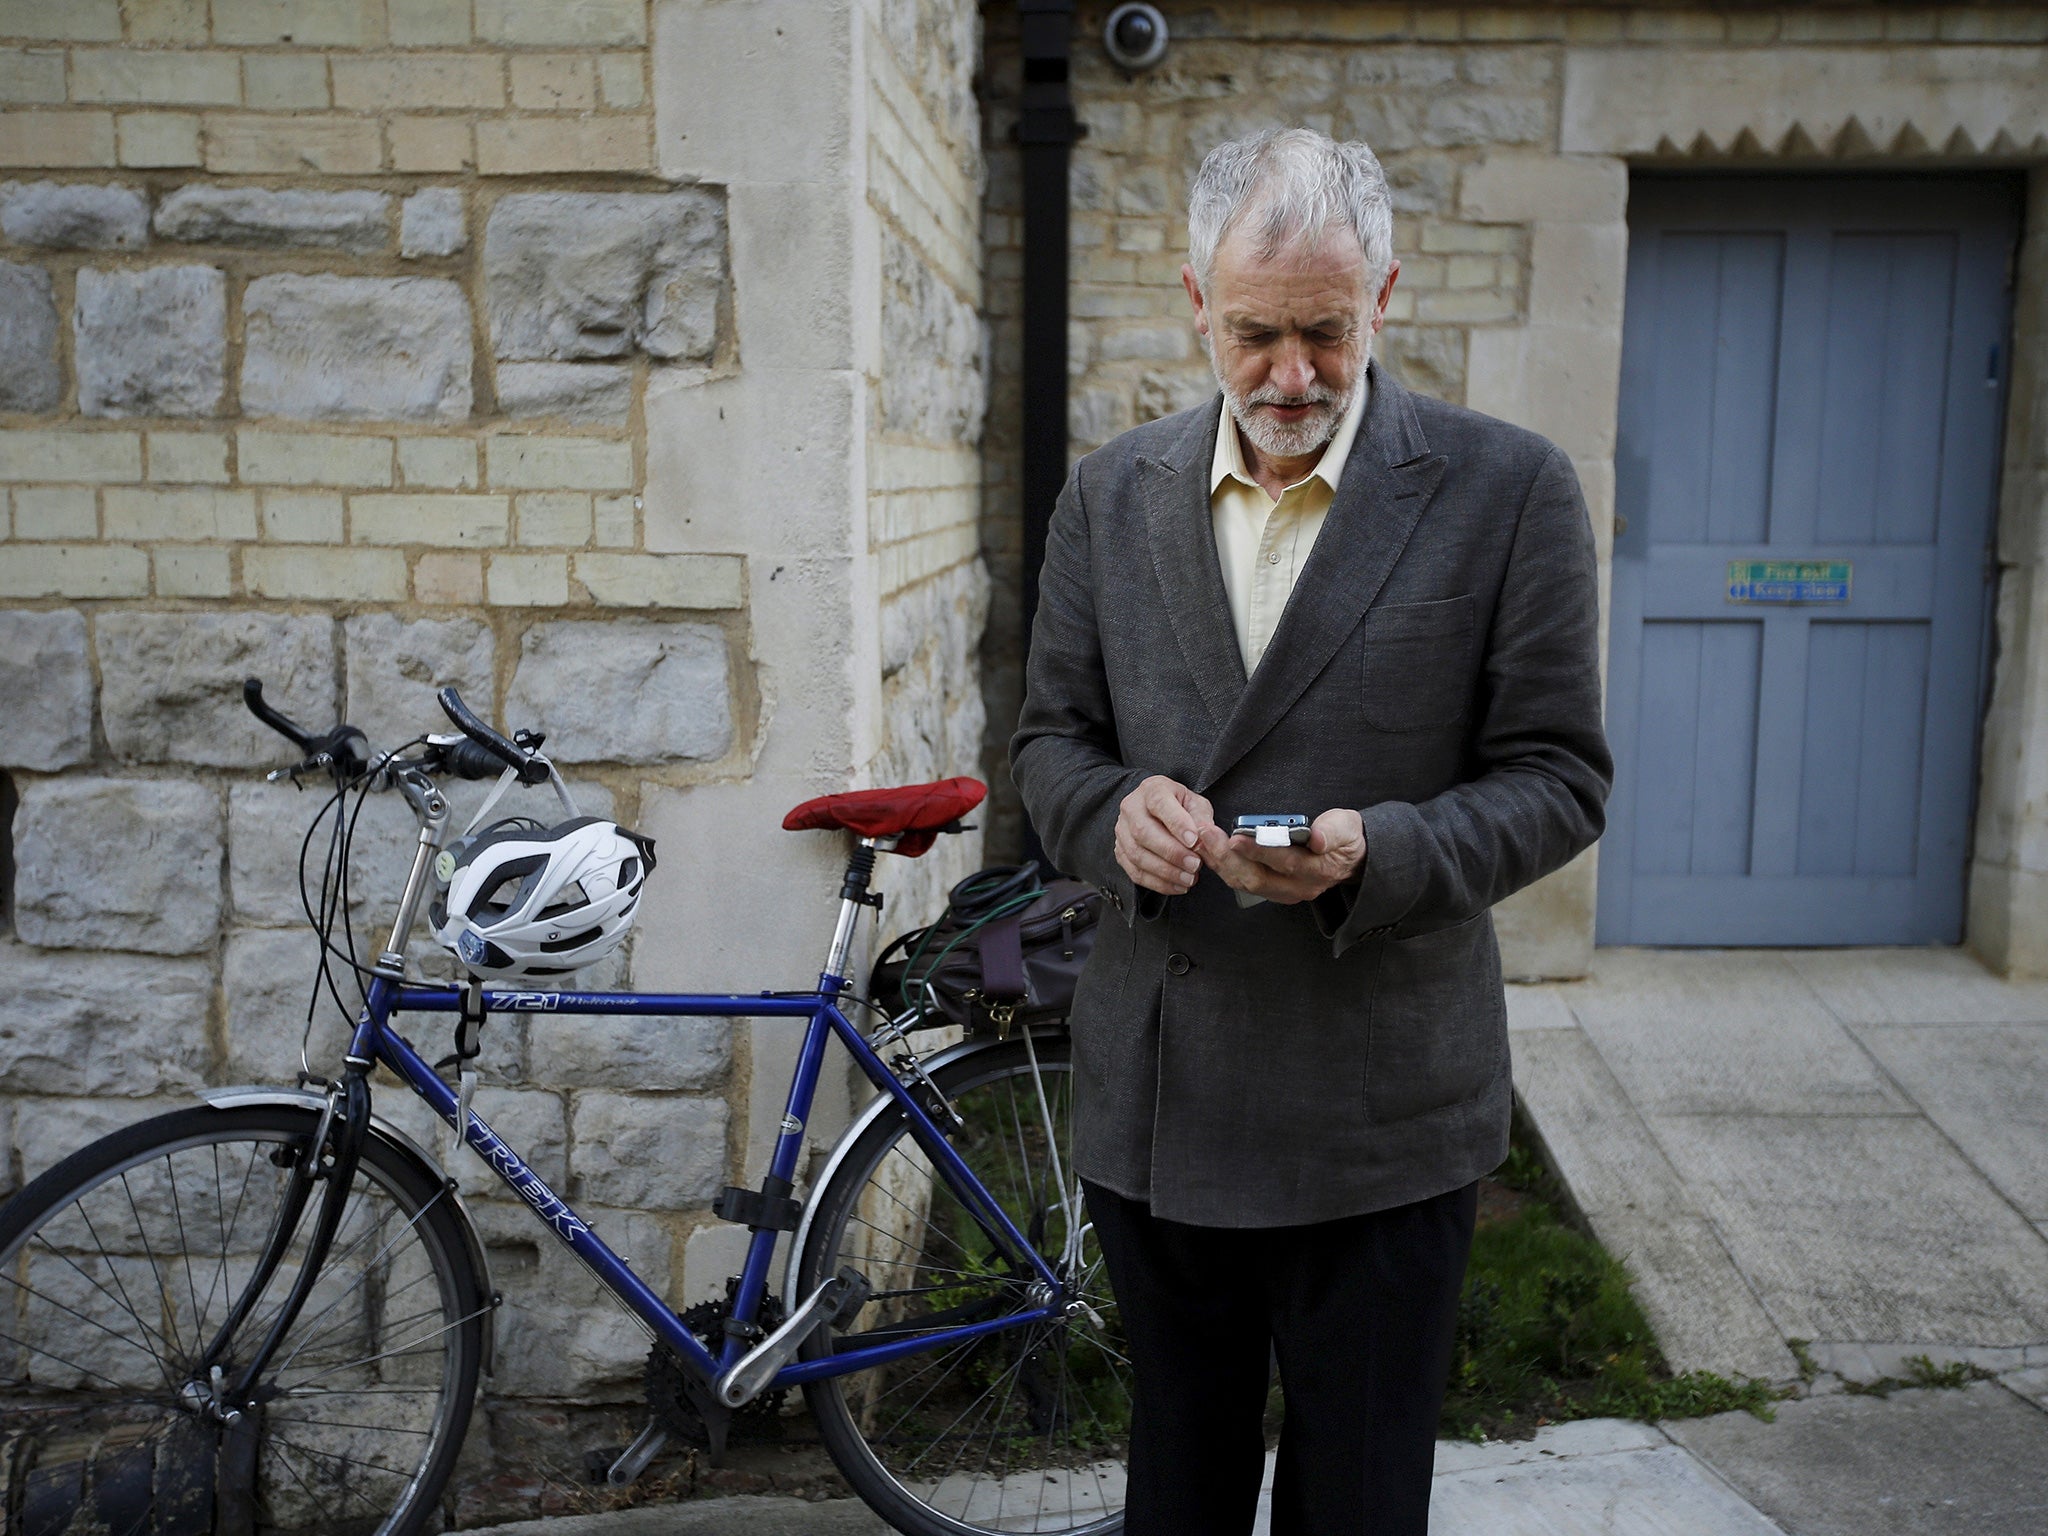 Labour Party leader Jeremy Corbyn checks his phone after arriving on his bicycle for a rally in London (Reuters)